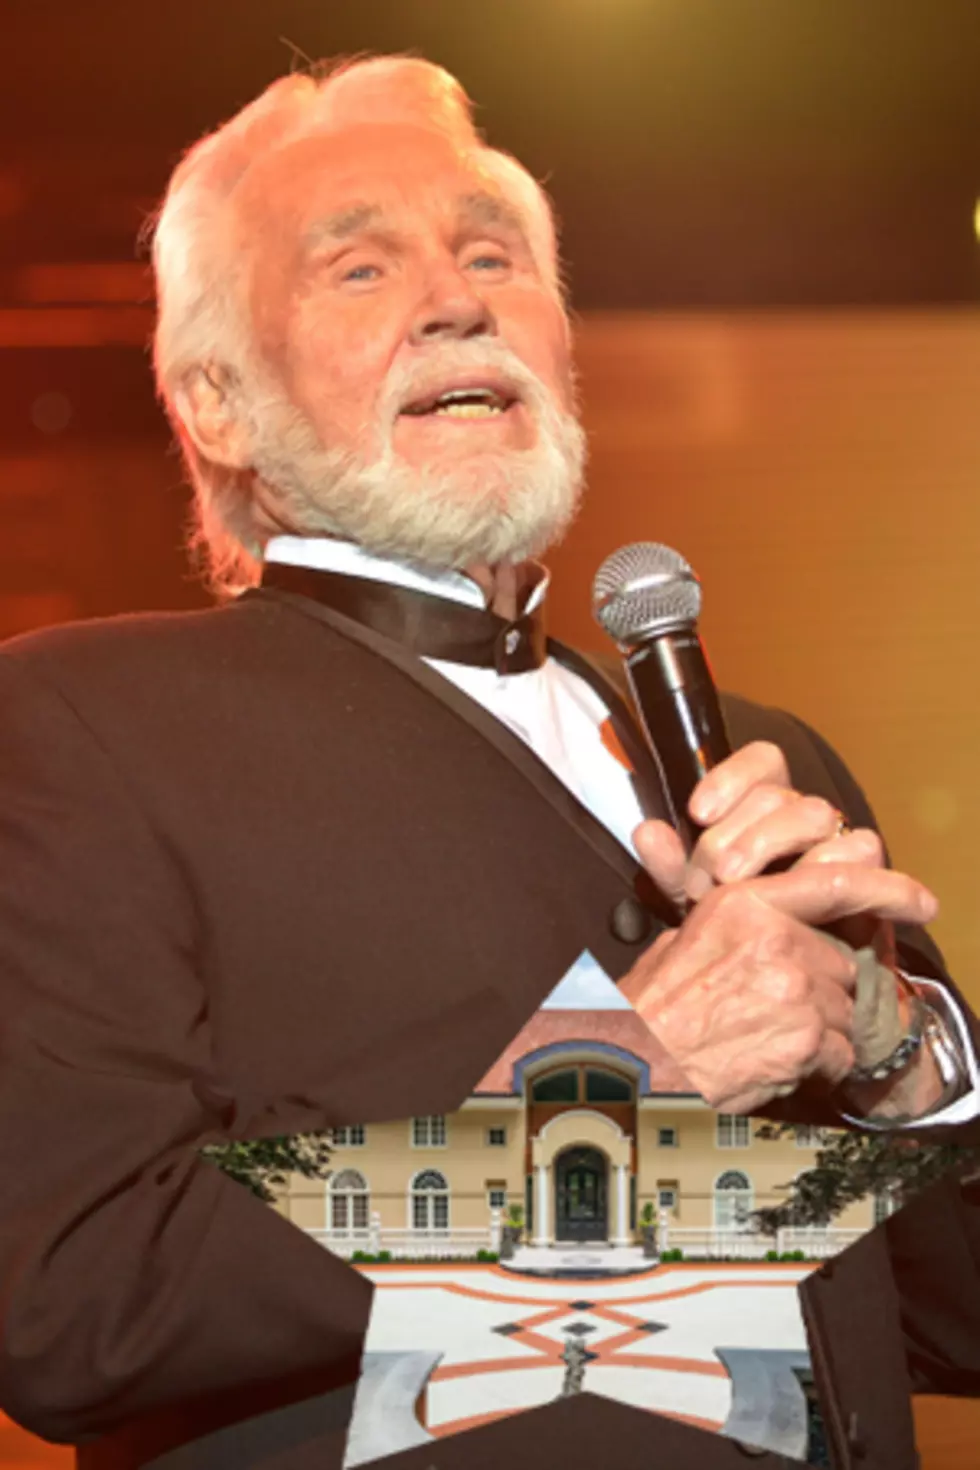 It’s Kenny Rogers’ House!